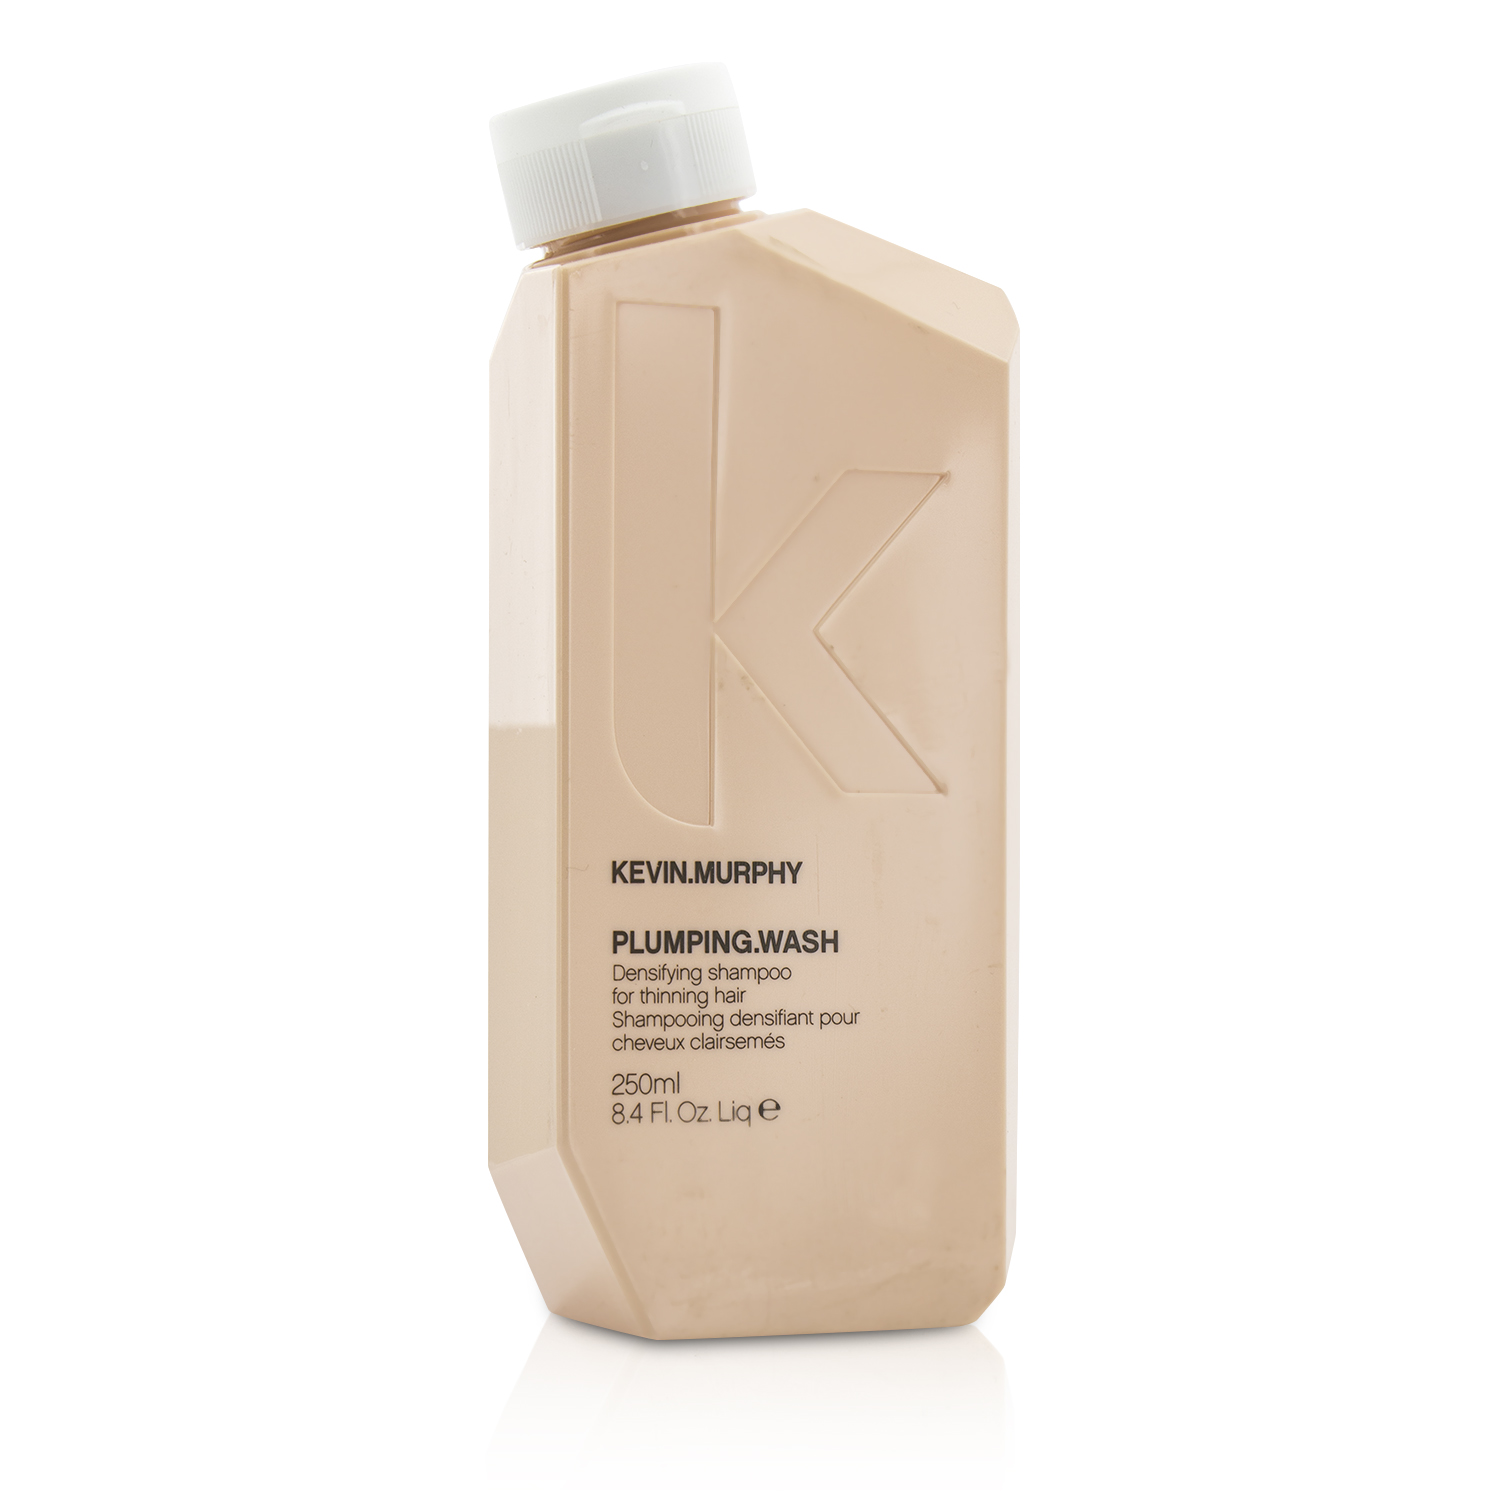 Plumping.Wash Densifying Shampoo (A Thickening Shampoo - For Thinning Hair) Kevin.Murphy Image